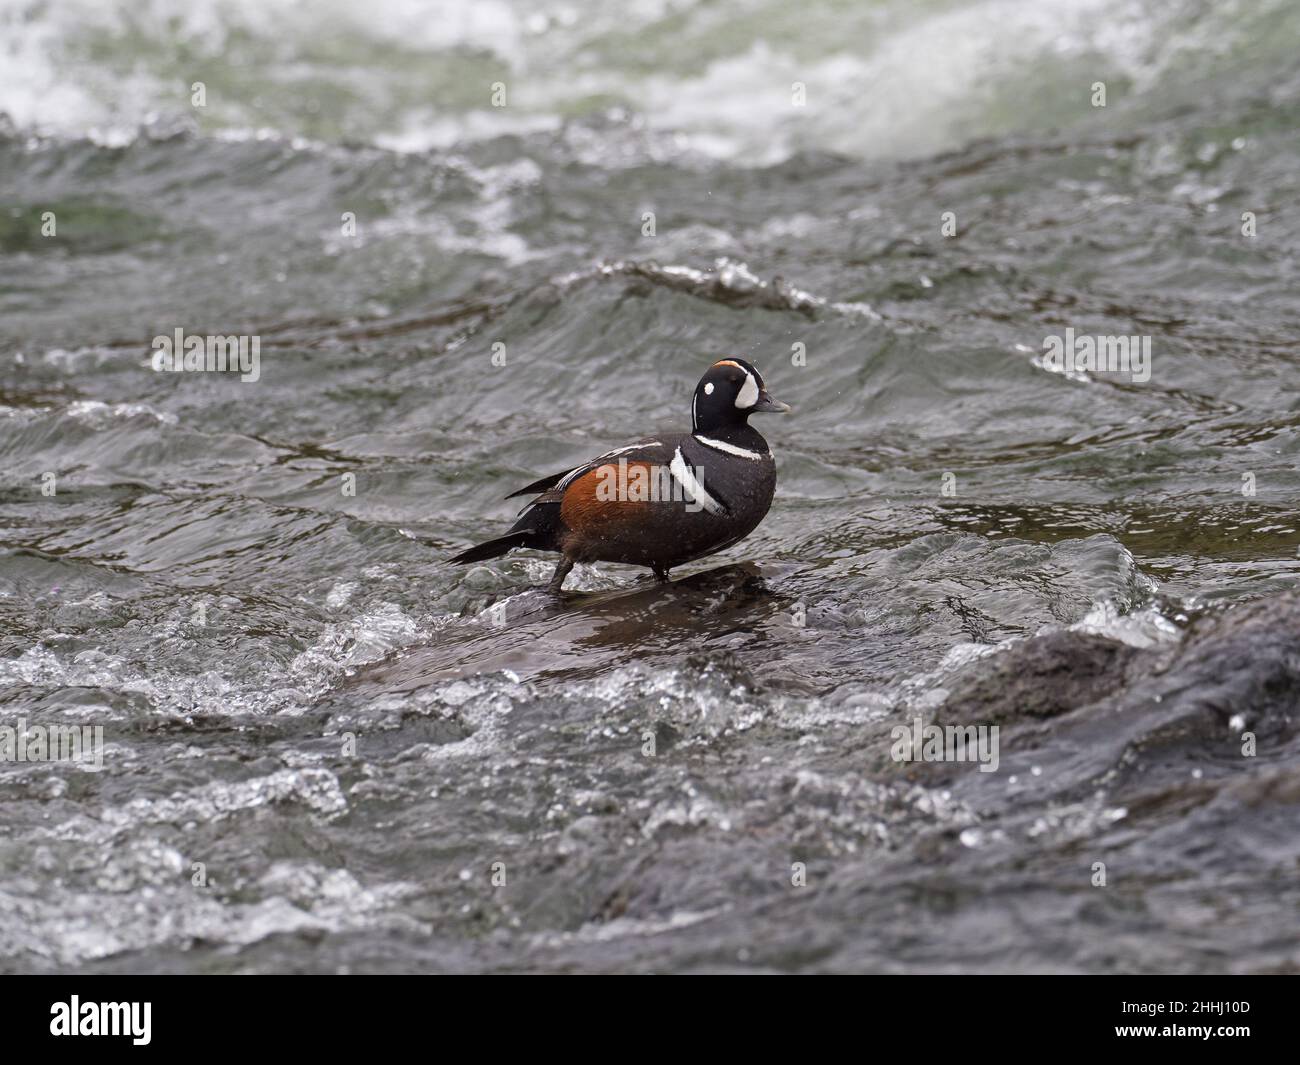 Harlequin duck Histrionicus histrionicus male on a rock in the LeHardy Rapids, Yellowstone River, Yellowstone National Park, Wyoming, USA, June 2019 Stock Photo